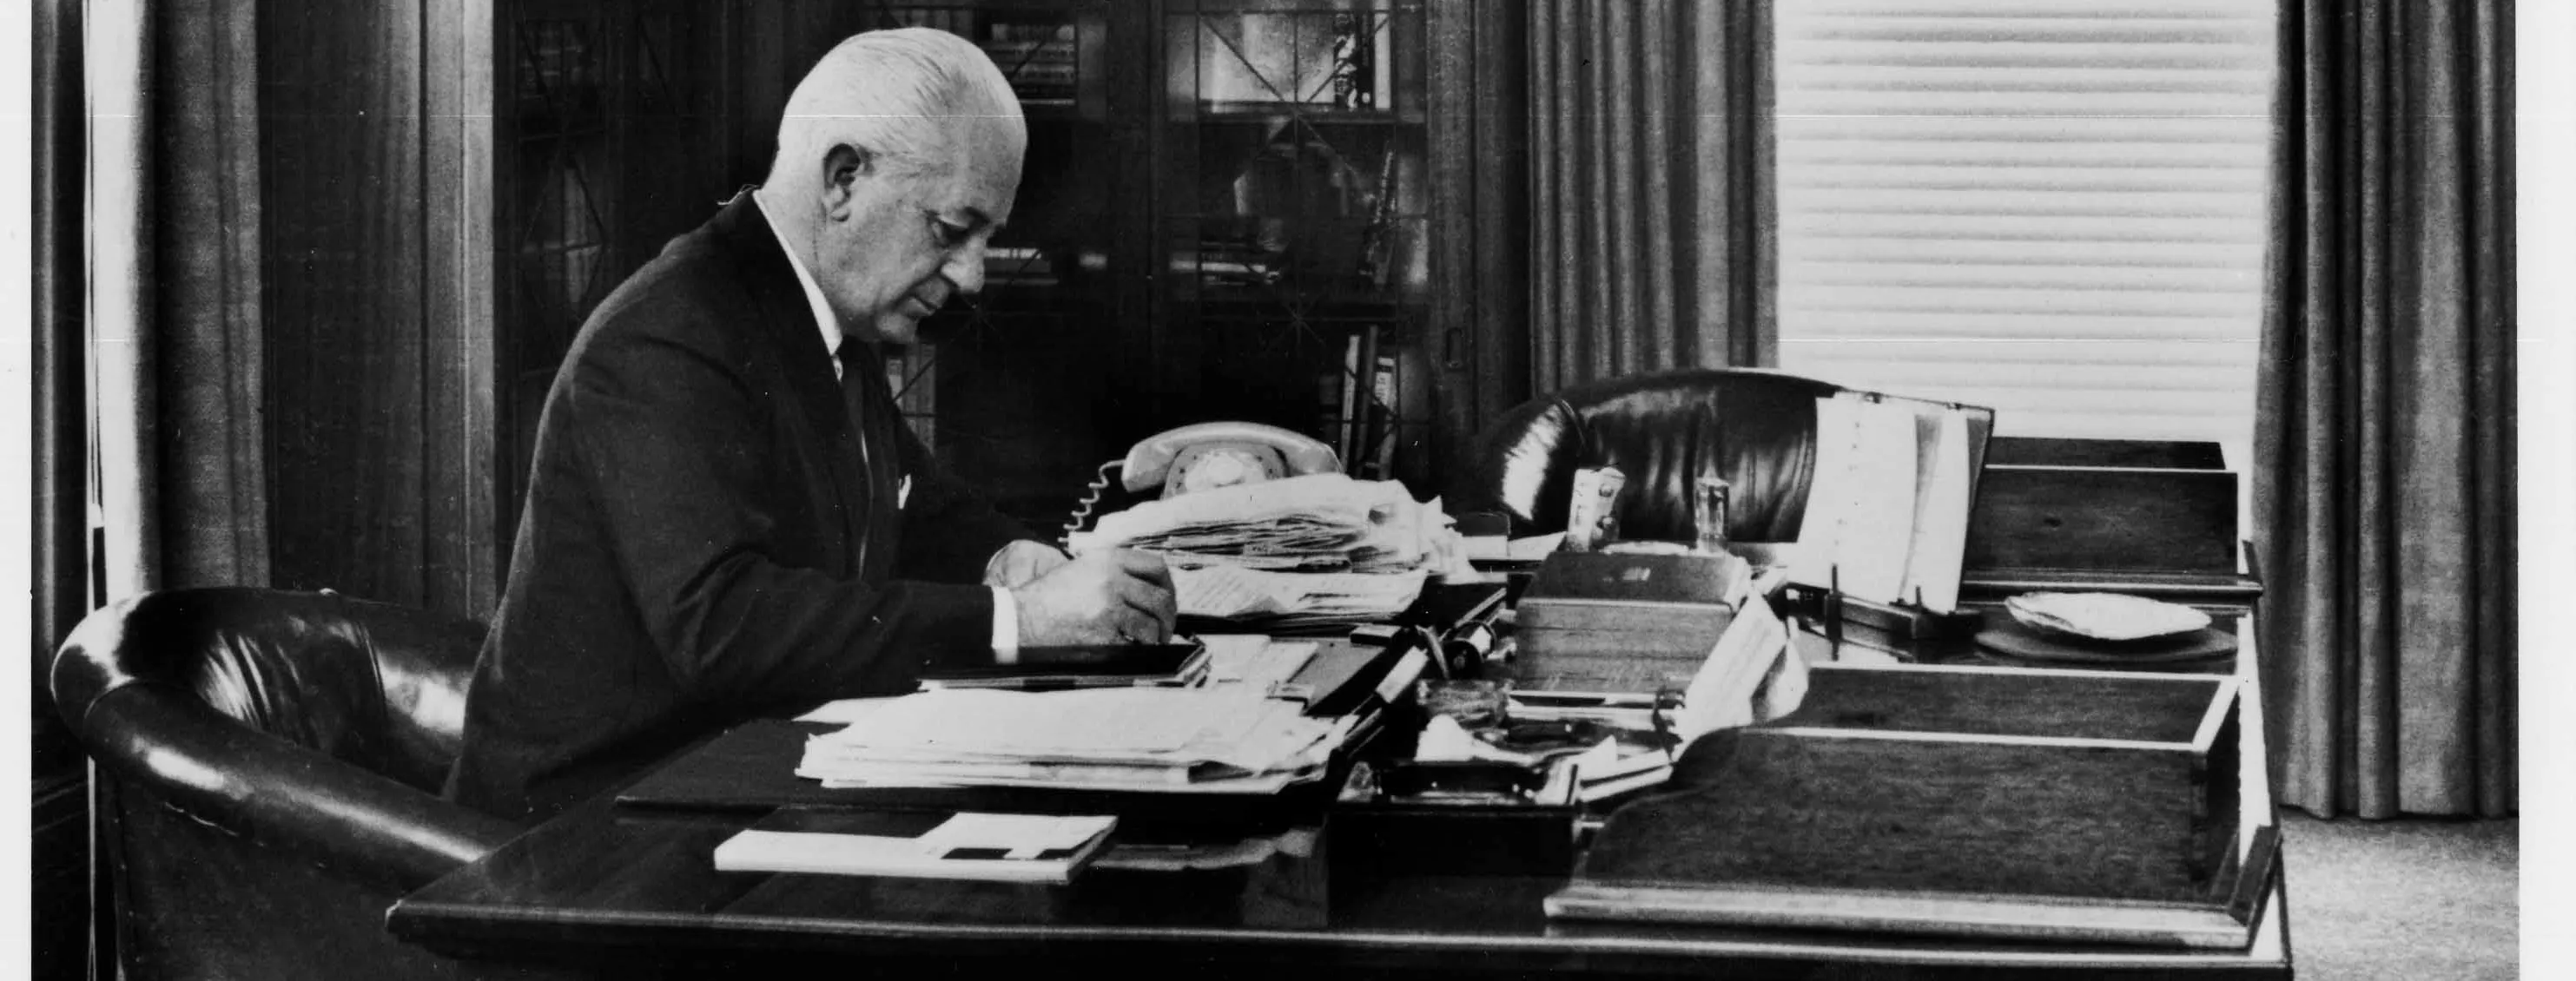 In this black and white photograph Prime Minister Harrold Holt sits at the timber desk made in 1926. Holt is wearing a dark suit, white shirt and tie and is leaning on the desk while he writes. The desk has fine carved panels with a geometric detailing on the corners. The surface of the desk is cluttered with stacks of documents and a telephone. On the glass-fronted cabinets in the background are a number of framed photographic portraits.  